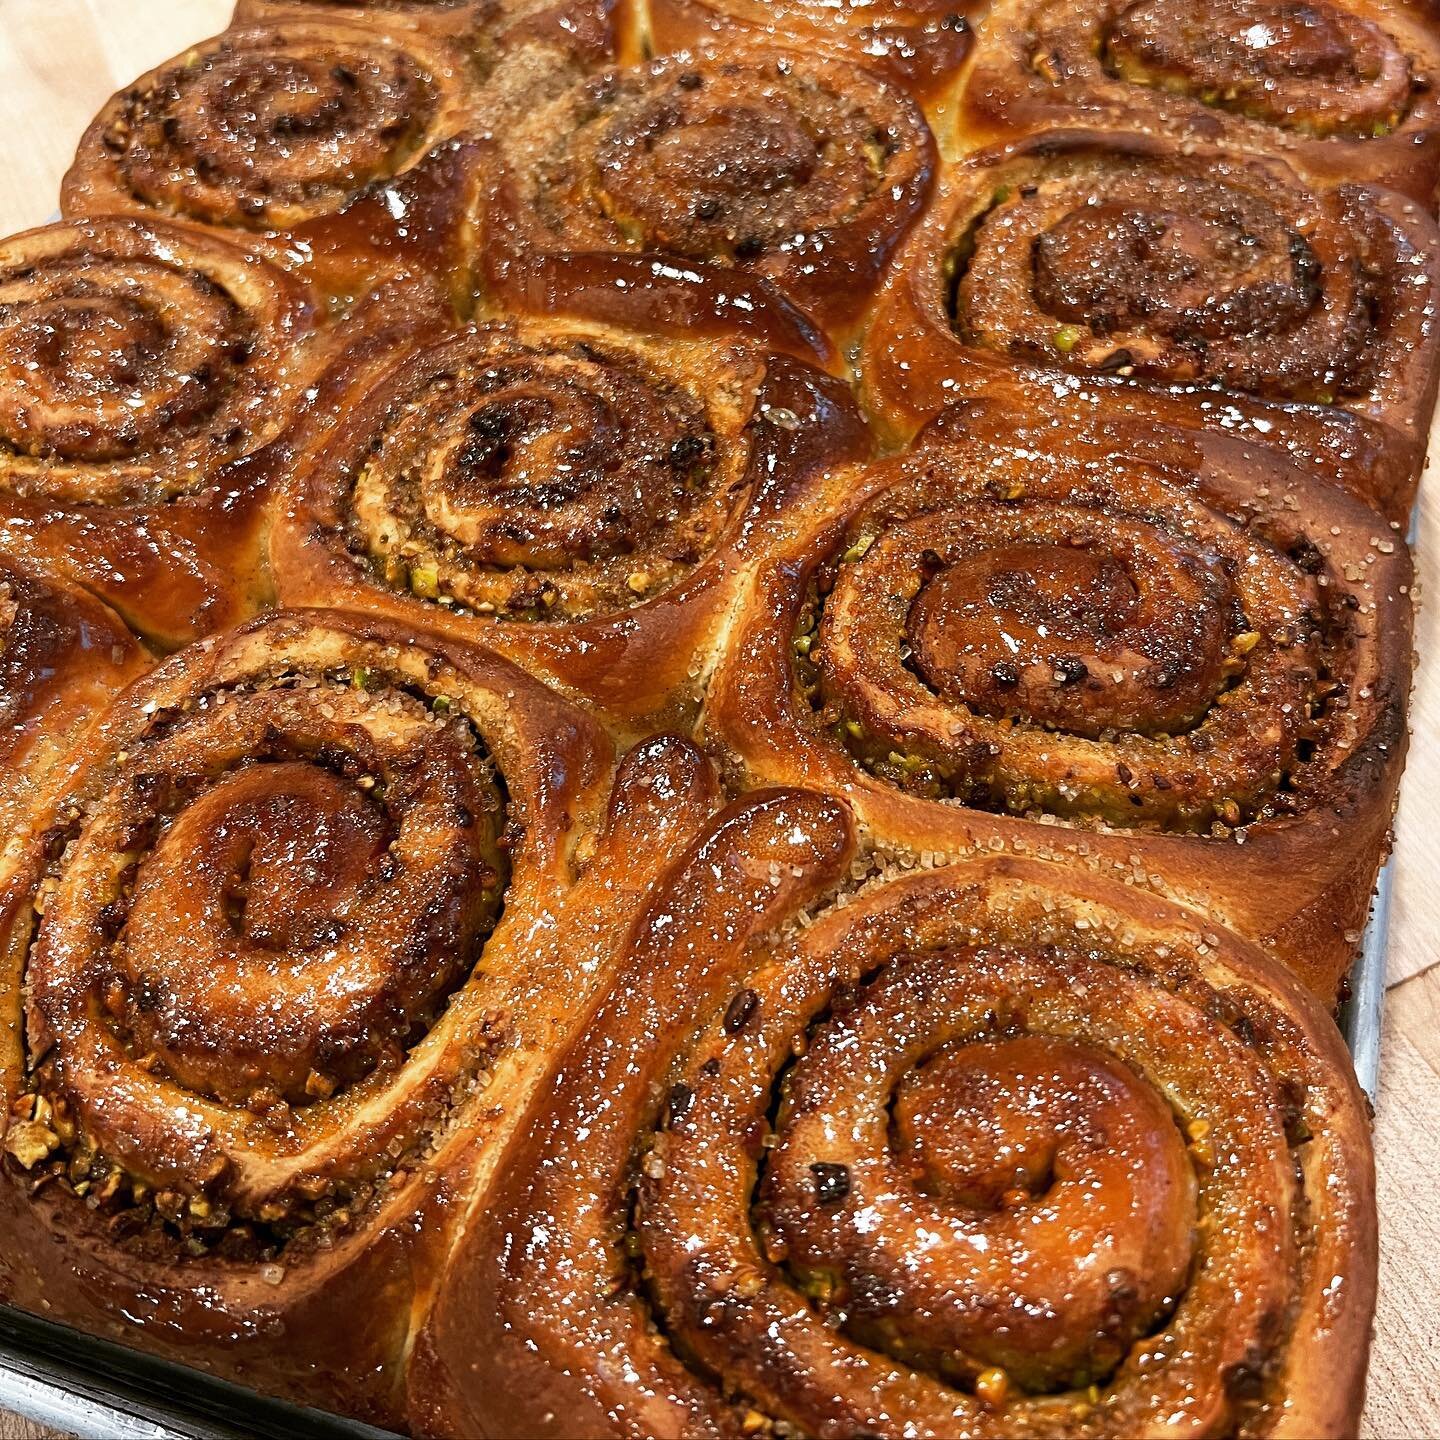 Cardamom Pistachio Rolls with Honey Glaze @nytimes Snagging one of these fragrant beauties might be one of the best decisions you will make today! #nytimescooking #yumbuns